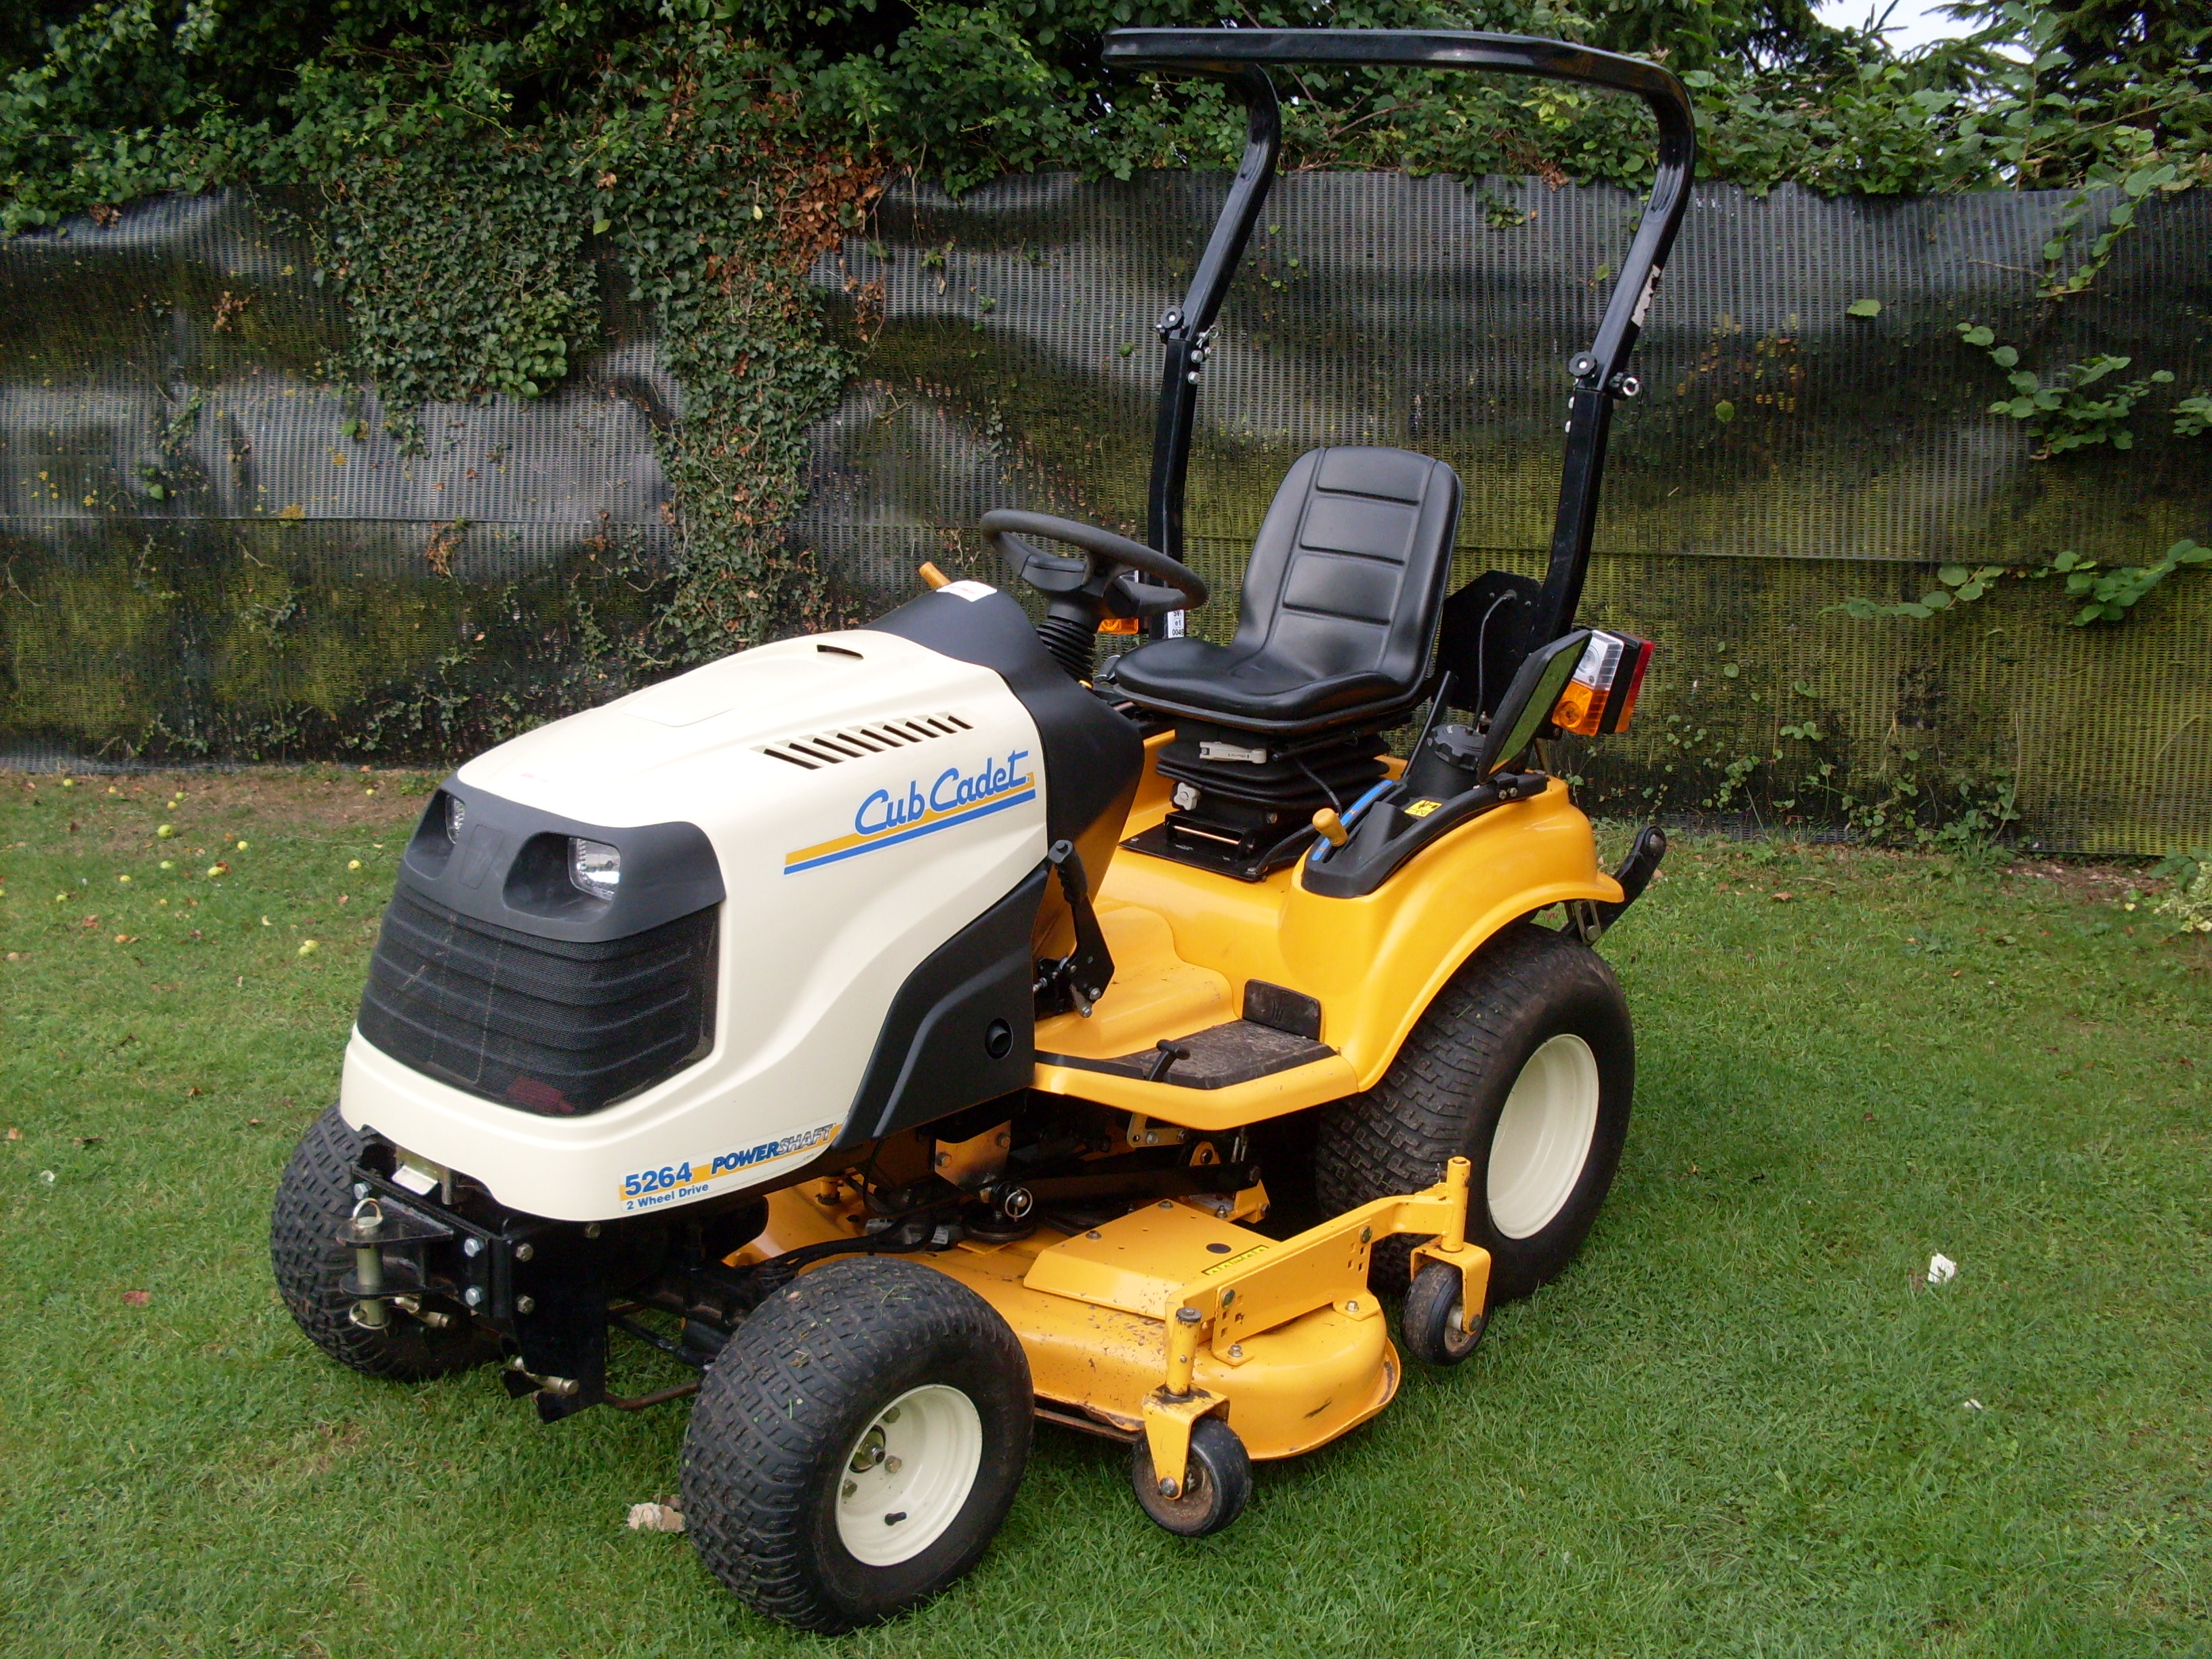 ... Garden Machinery – Used machines » Blog Archive » Cub Cadet 5264